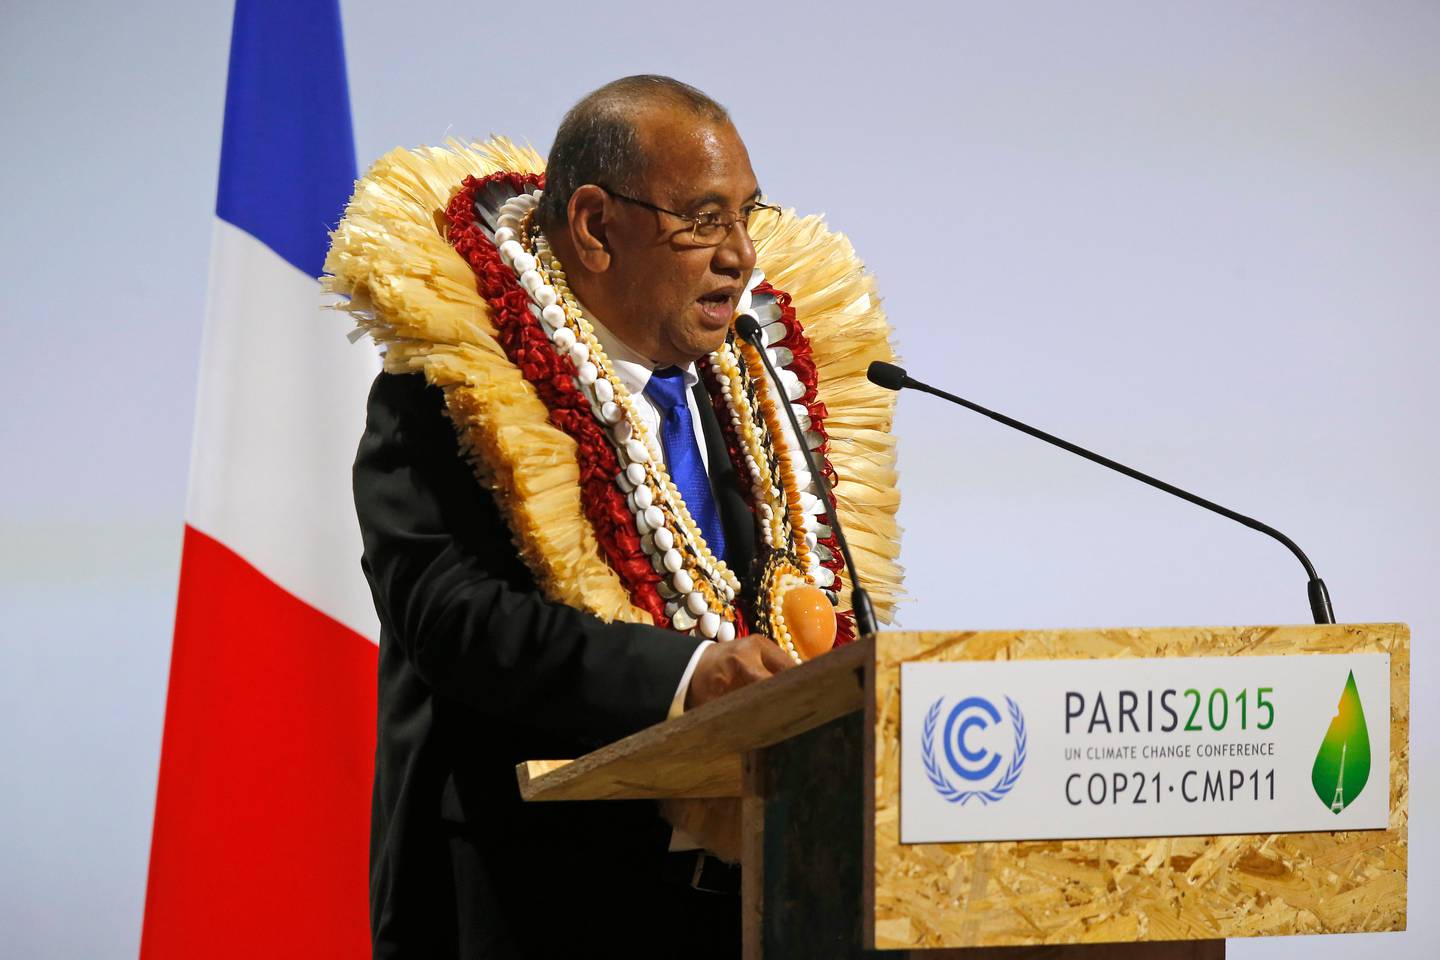 President of the Marshall Islands Christopher J. Loeak addresses world leaders at the COP21, United Nations Climate Change Conference, in Le Bourget, outside Paris, Monday, Nov. 30, 2015. (AP Photo/Michel Euler)